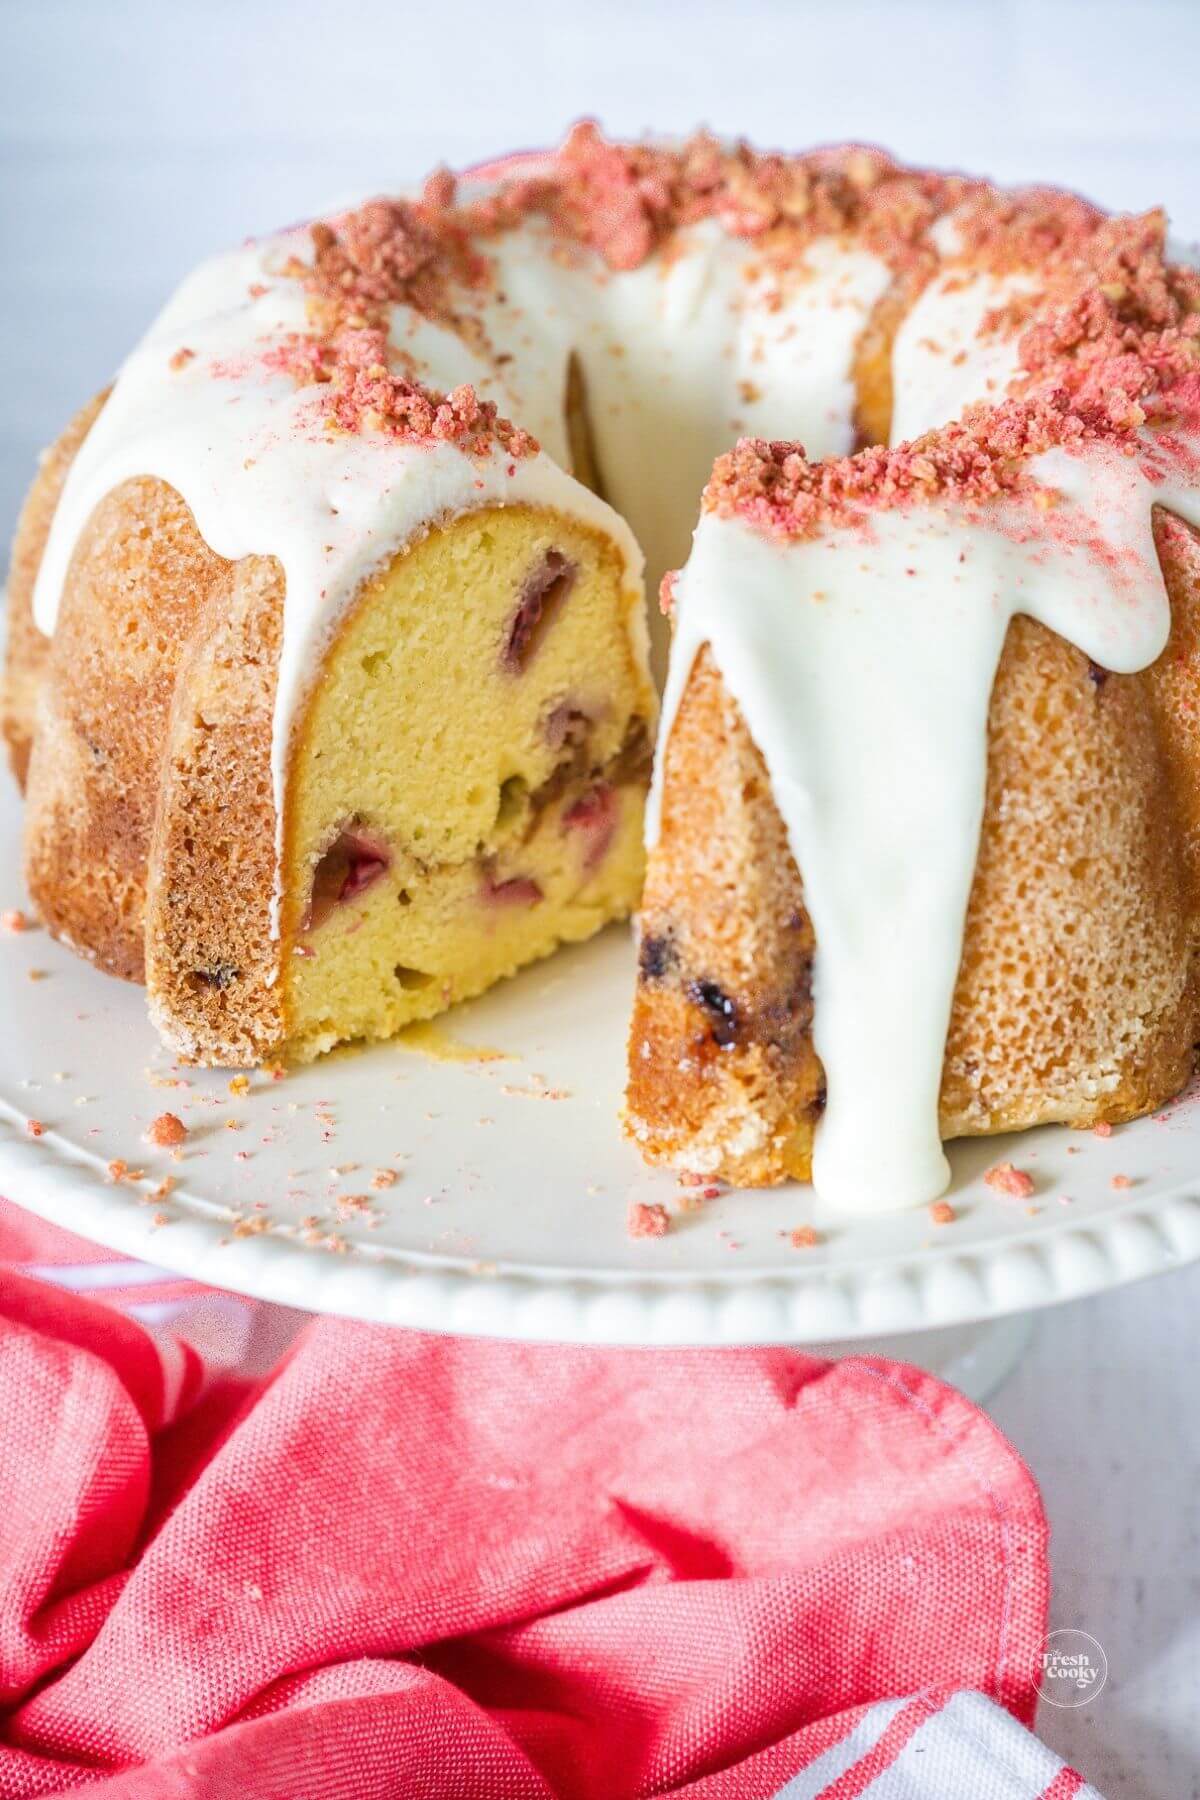 Strawberry crunch pound cake with slice removed.